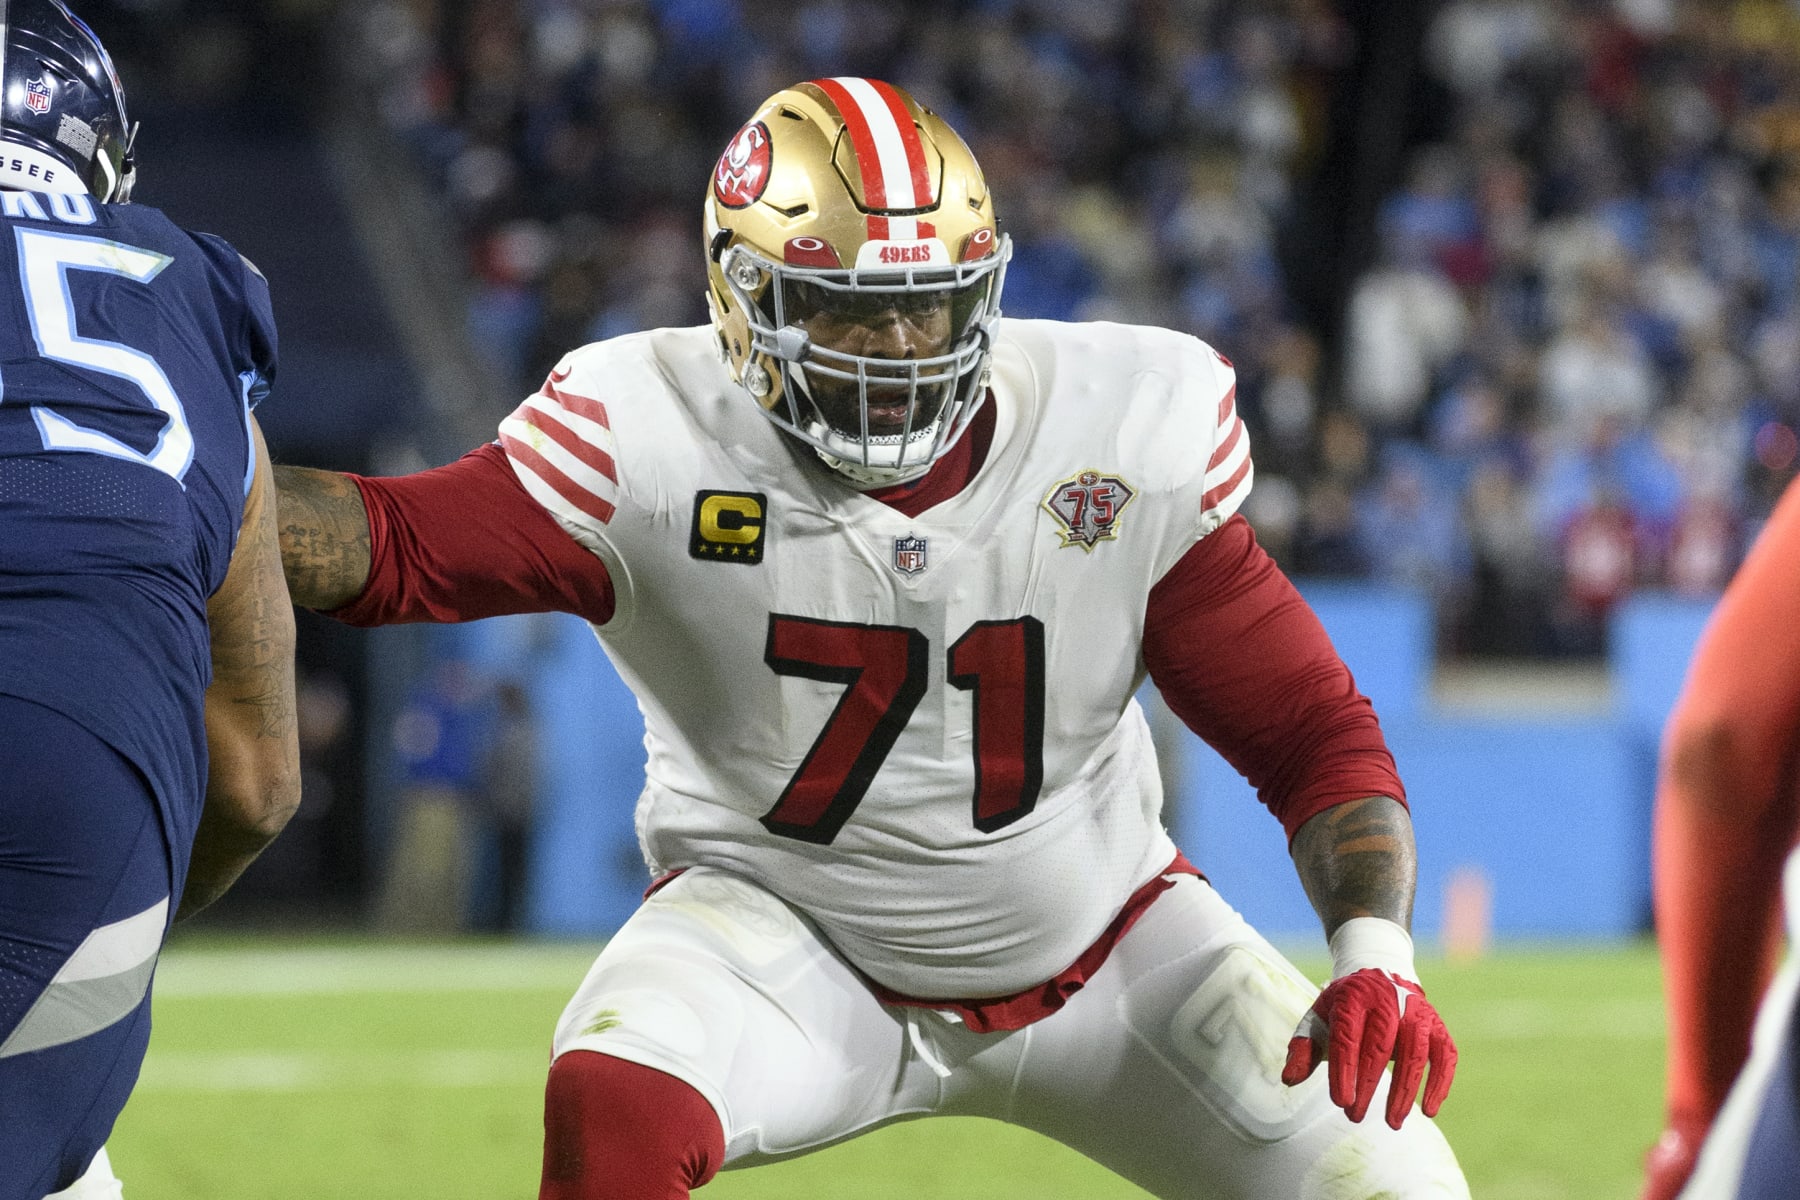 Madden 23 Player Ratings: 49ers' Trent Williams, Cowboys' Zack